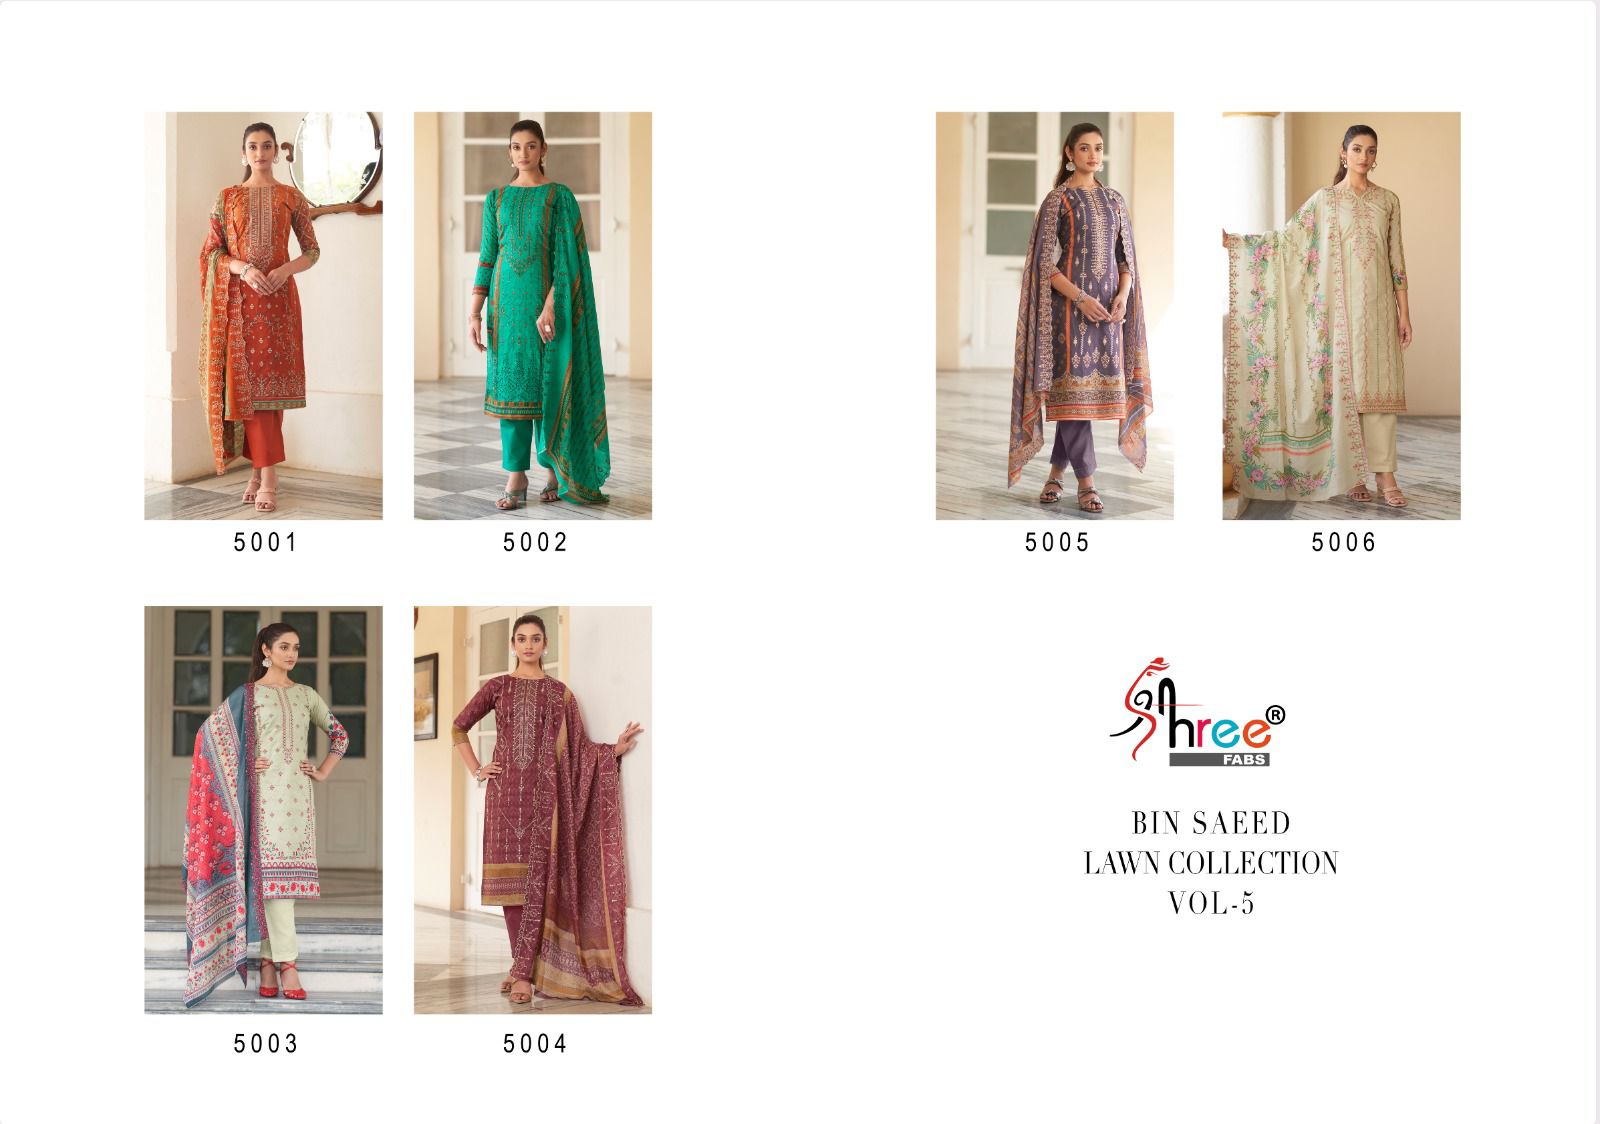 Shree Bin Saeed Lawn Collection Vol 5 collection 1